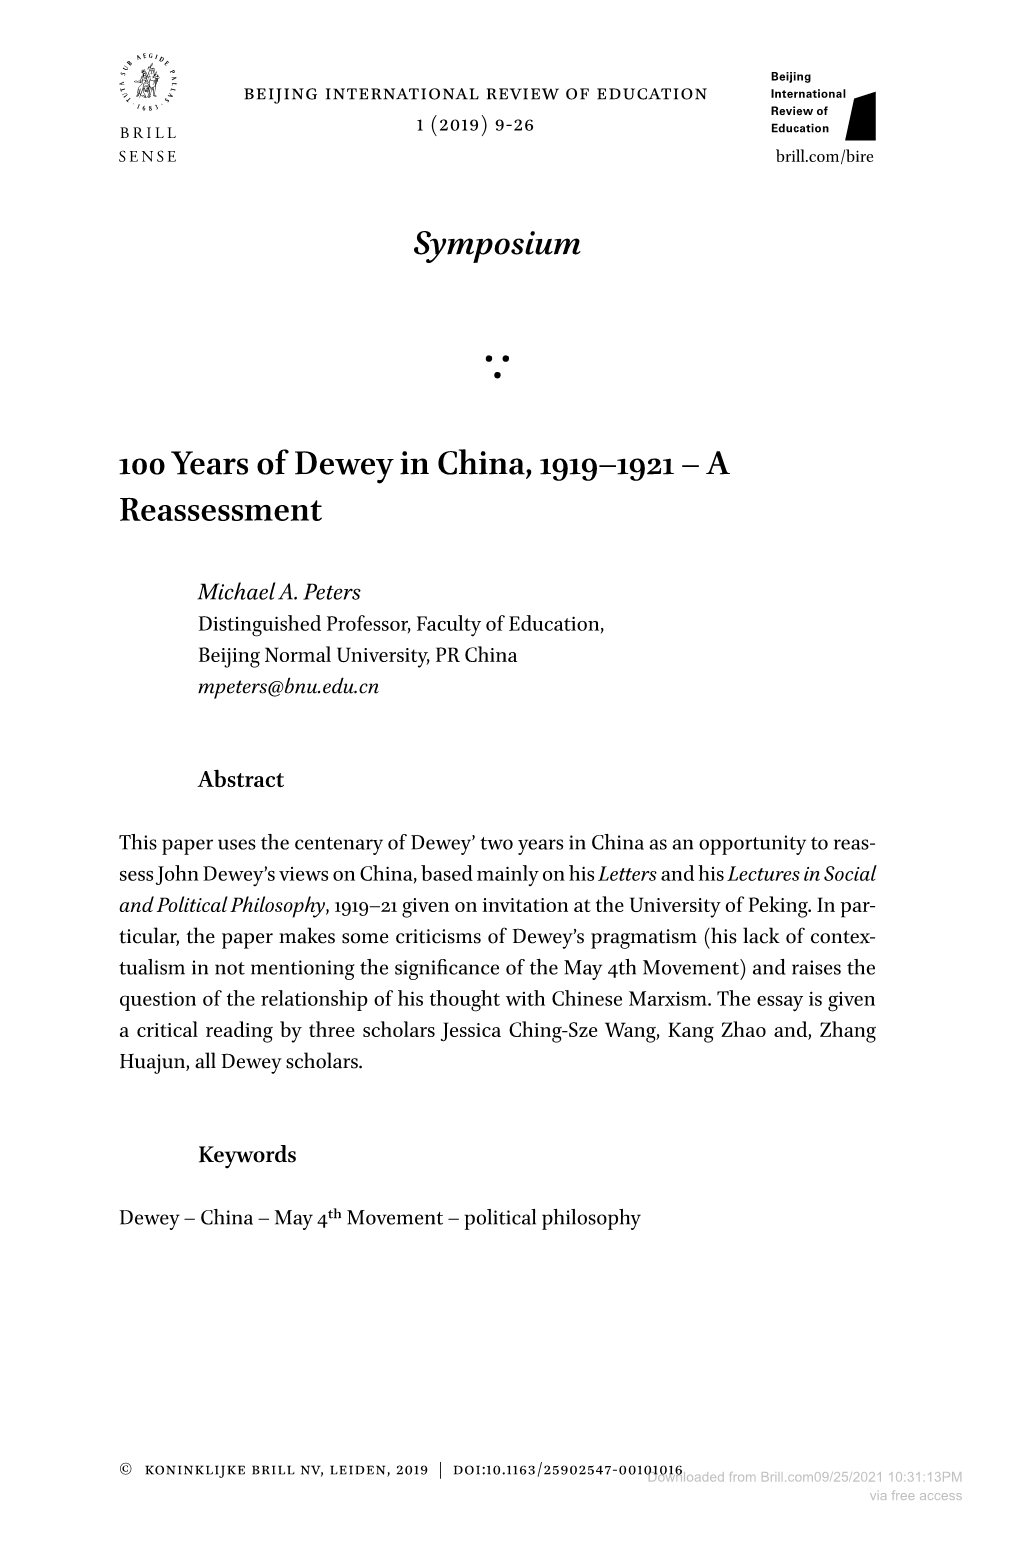 Symposium 100 Years of Dewey in China, 1919–1921 – a Reassessment